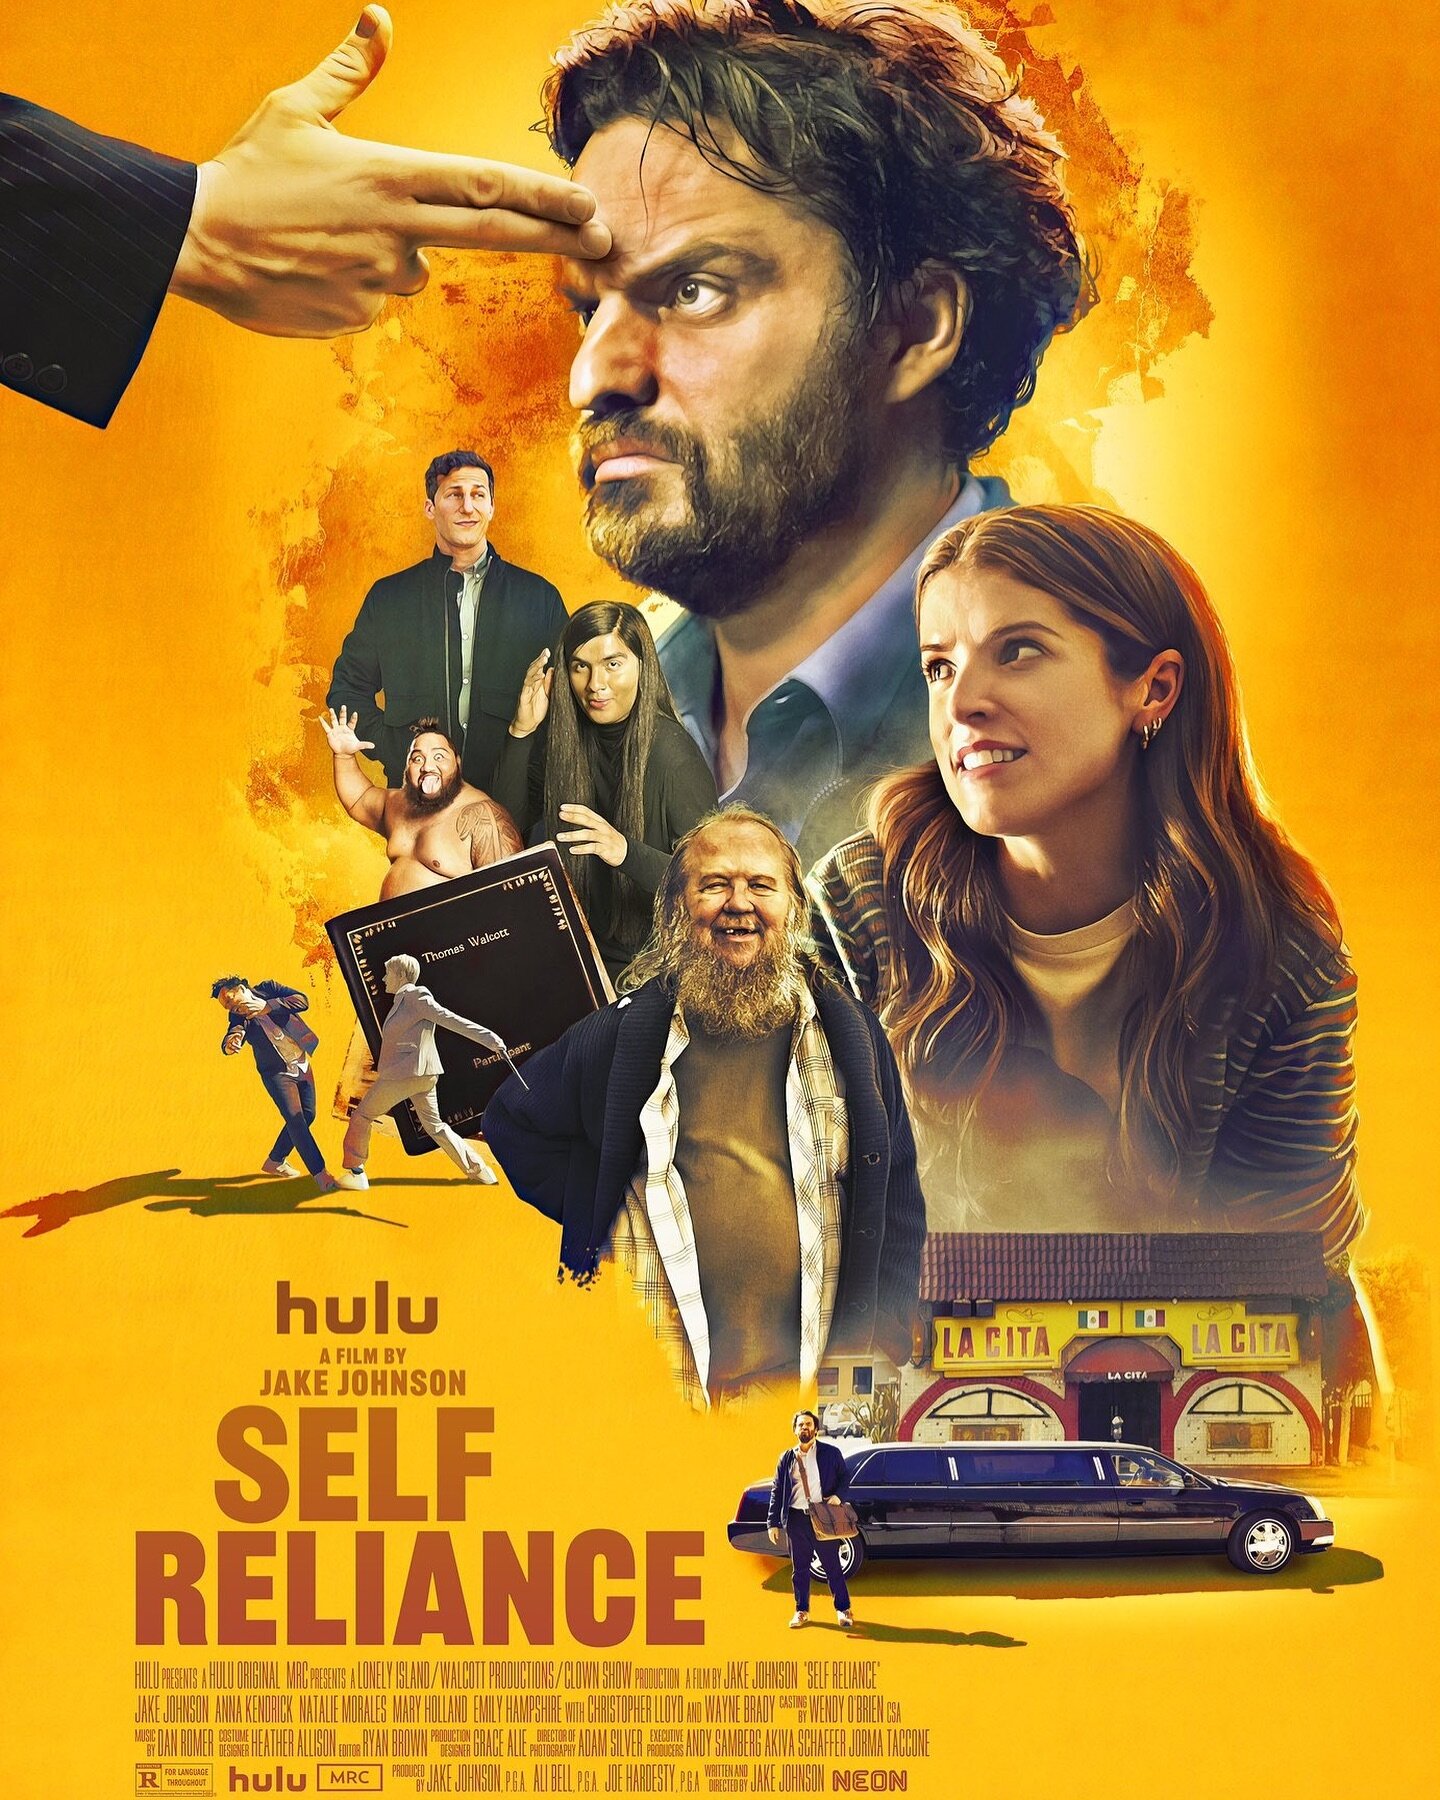 &ldquo;Self Reliance&rdquo; is out today on @hulu! Scored by the incredible @danromer